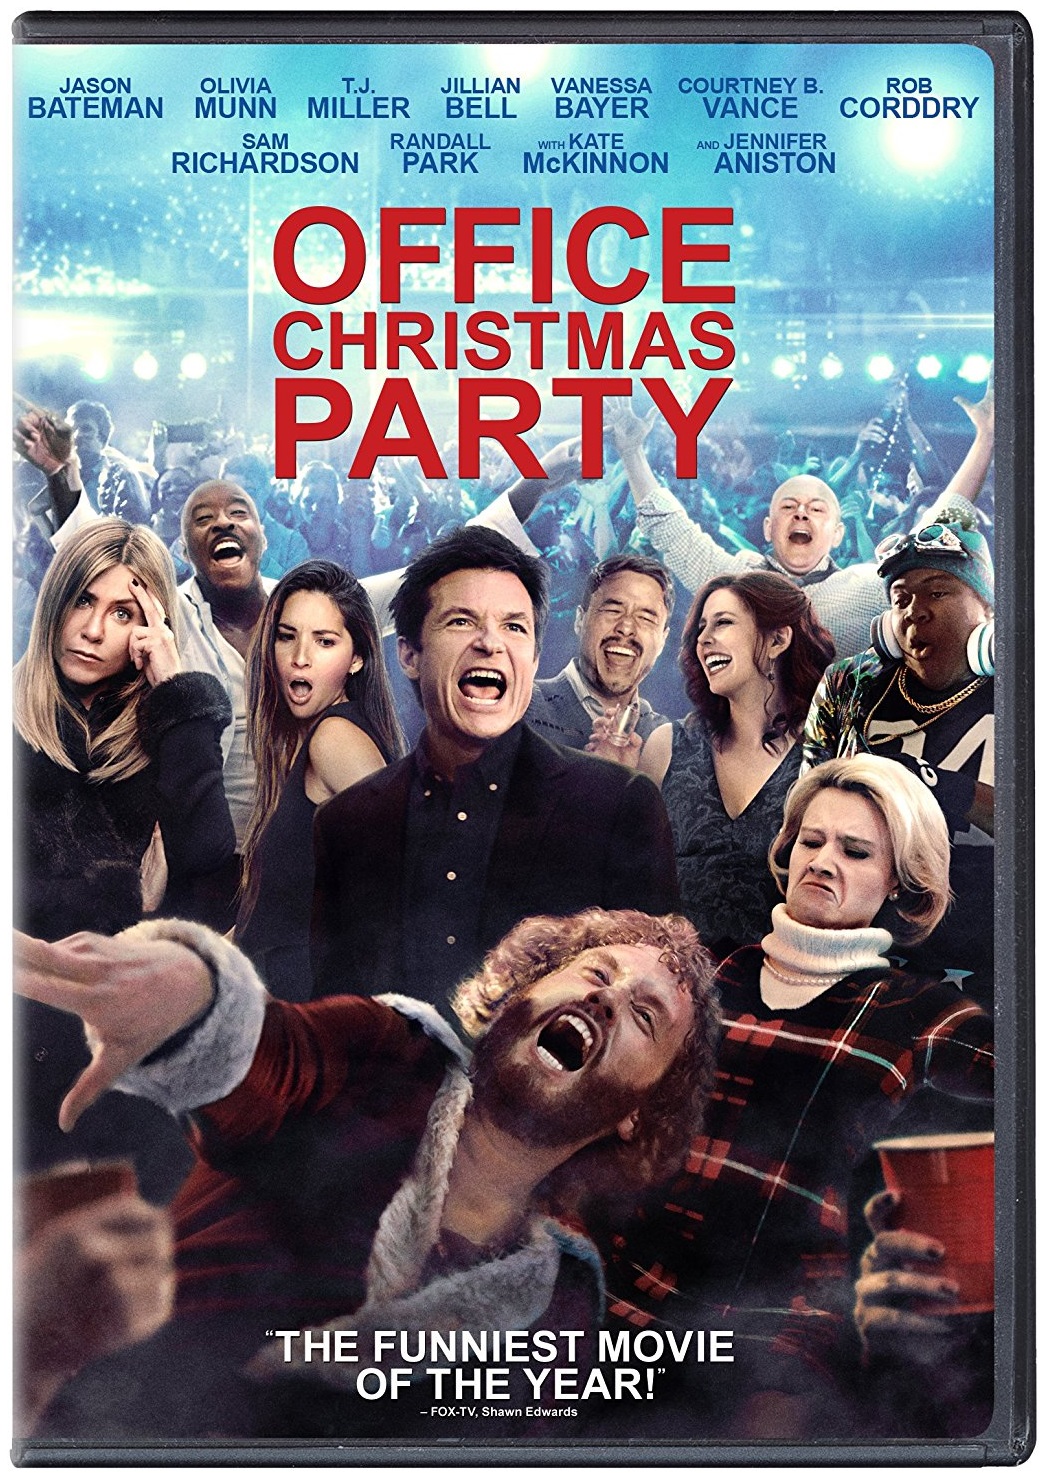 Office Christmas Party: a riotous, tawdry good time – DVD review « Celebrity Gossip ...